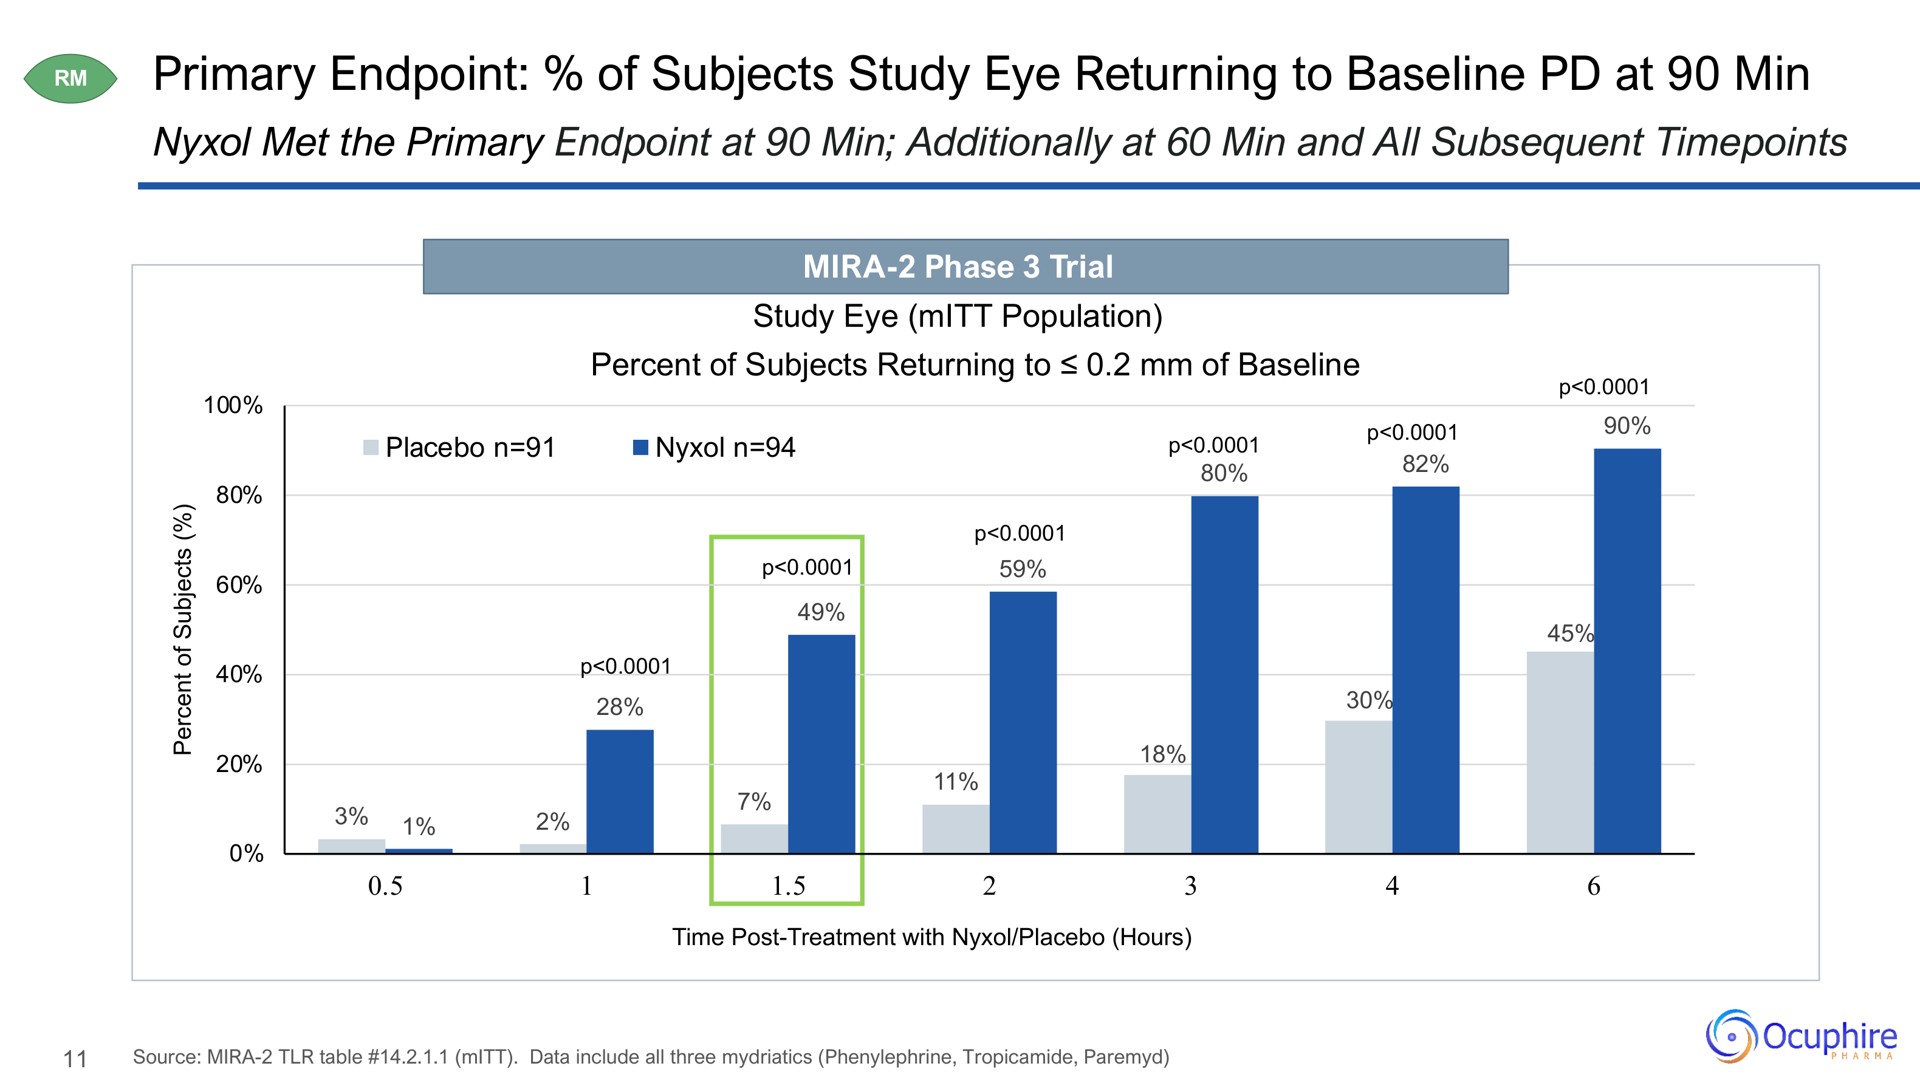 primary of subjects study eye returning to at min | Ocuphire Pharma